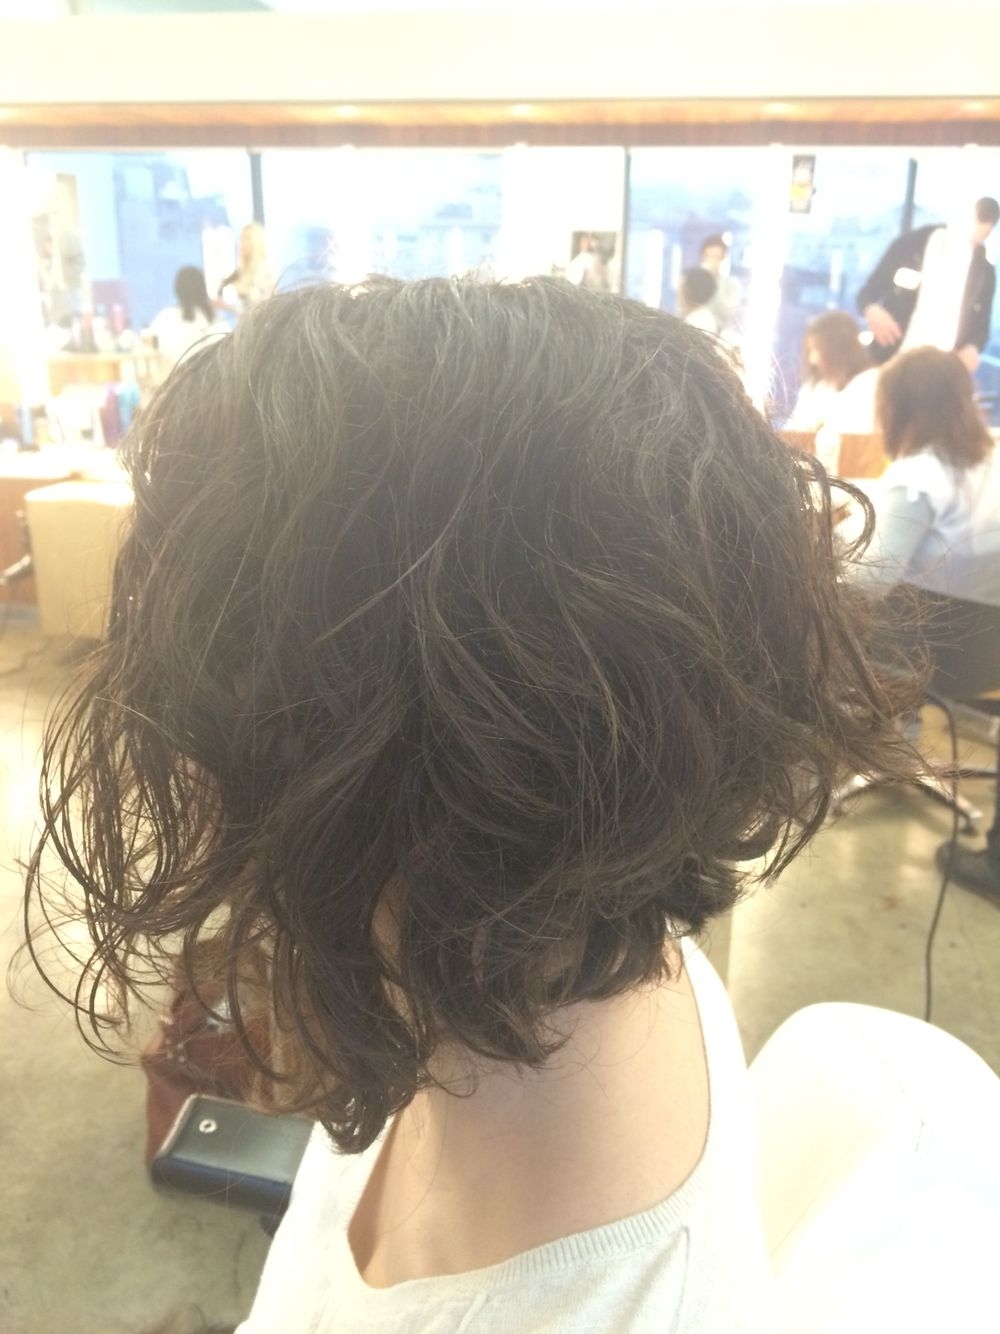 Pin On Pretty Hair throughout Aline Haircuts For Curly Hair